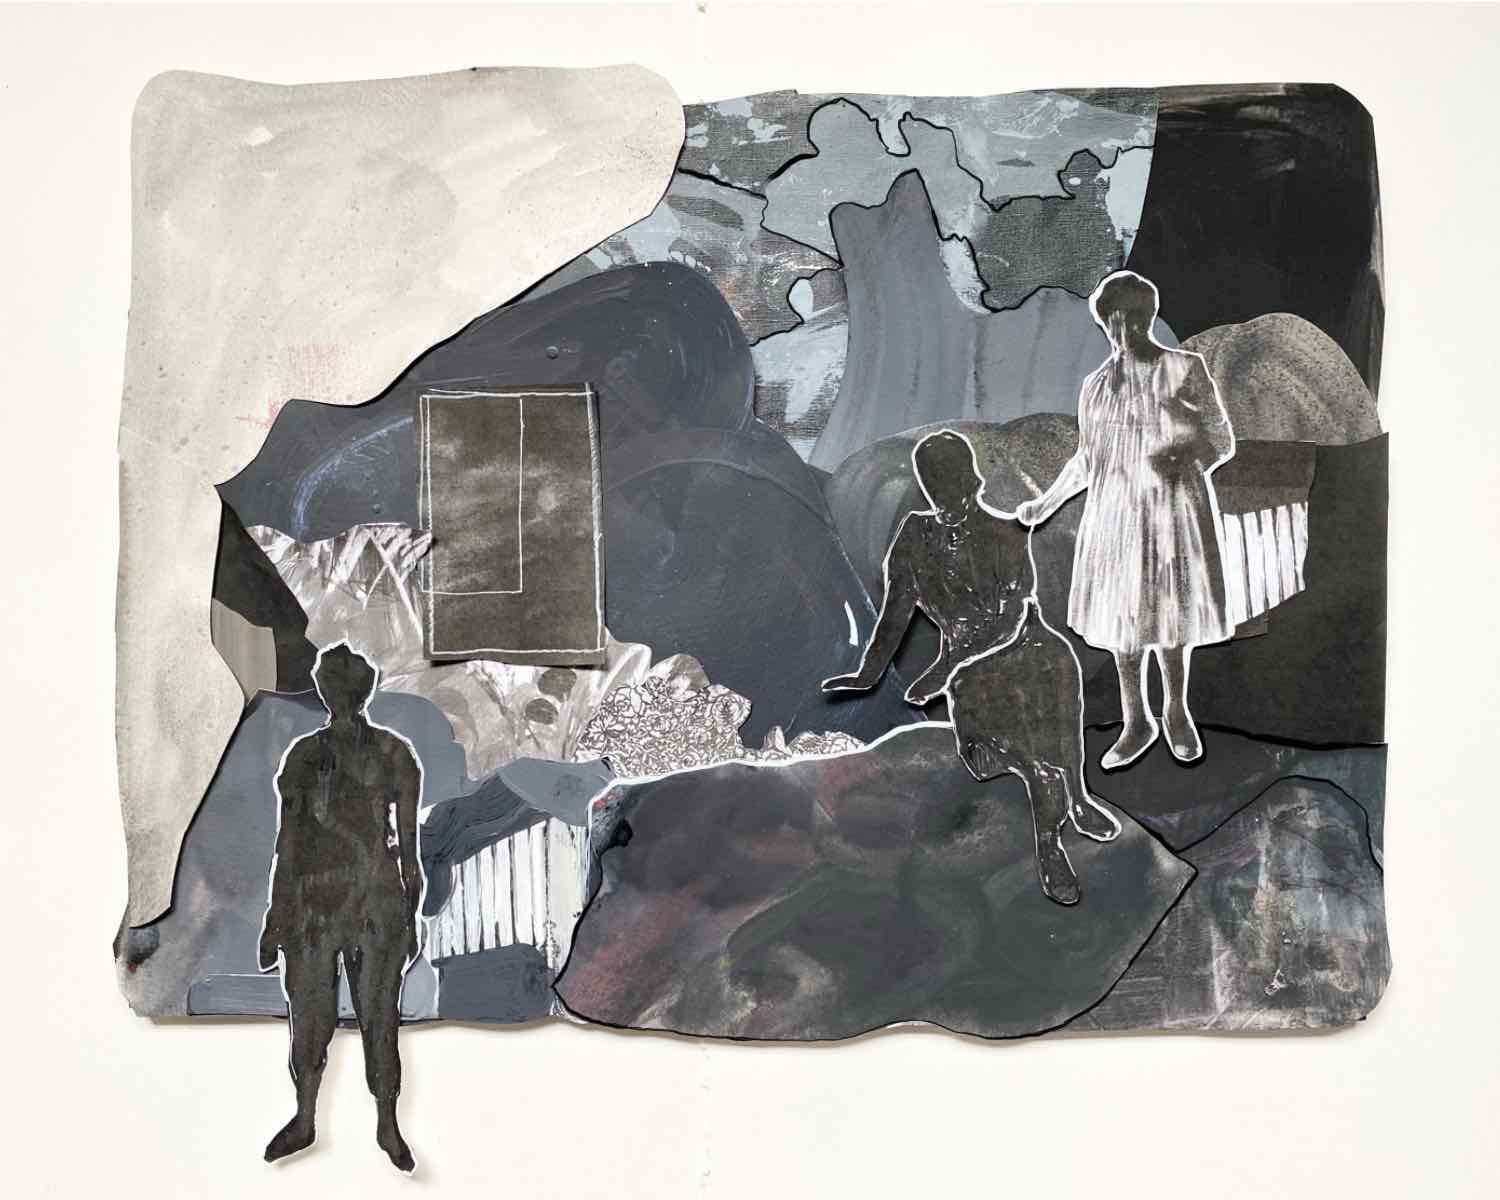 Avery Williamson - "Black and White collage"